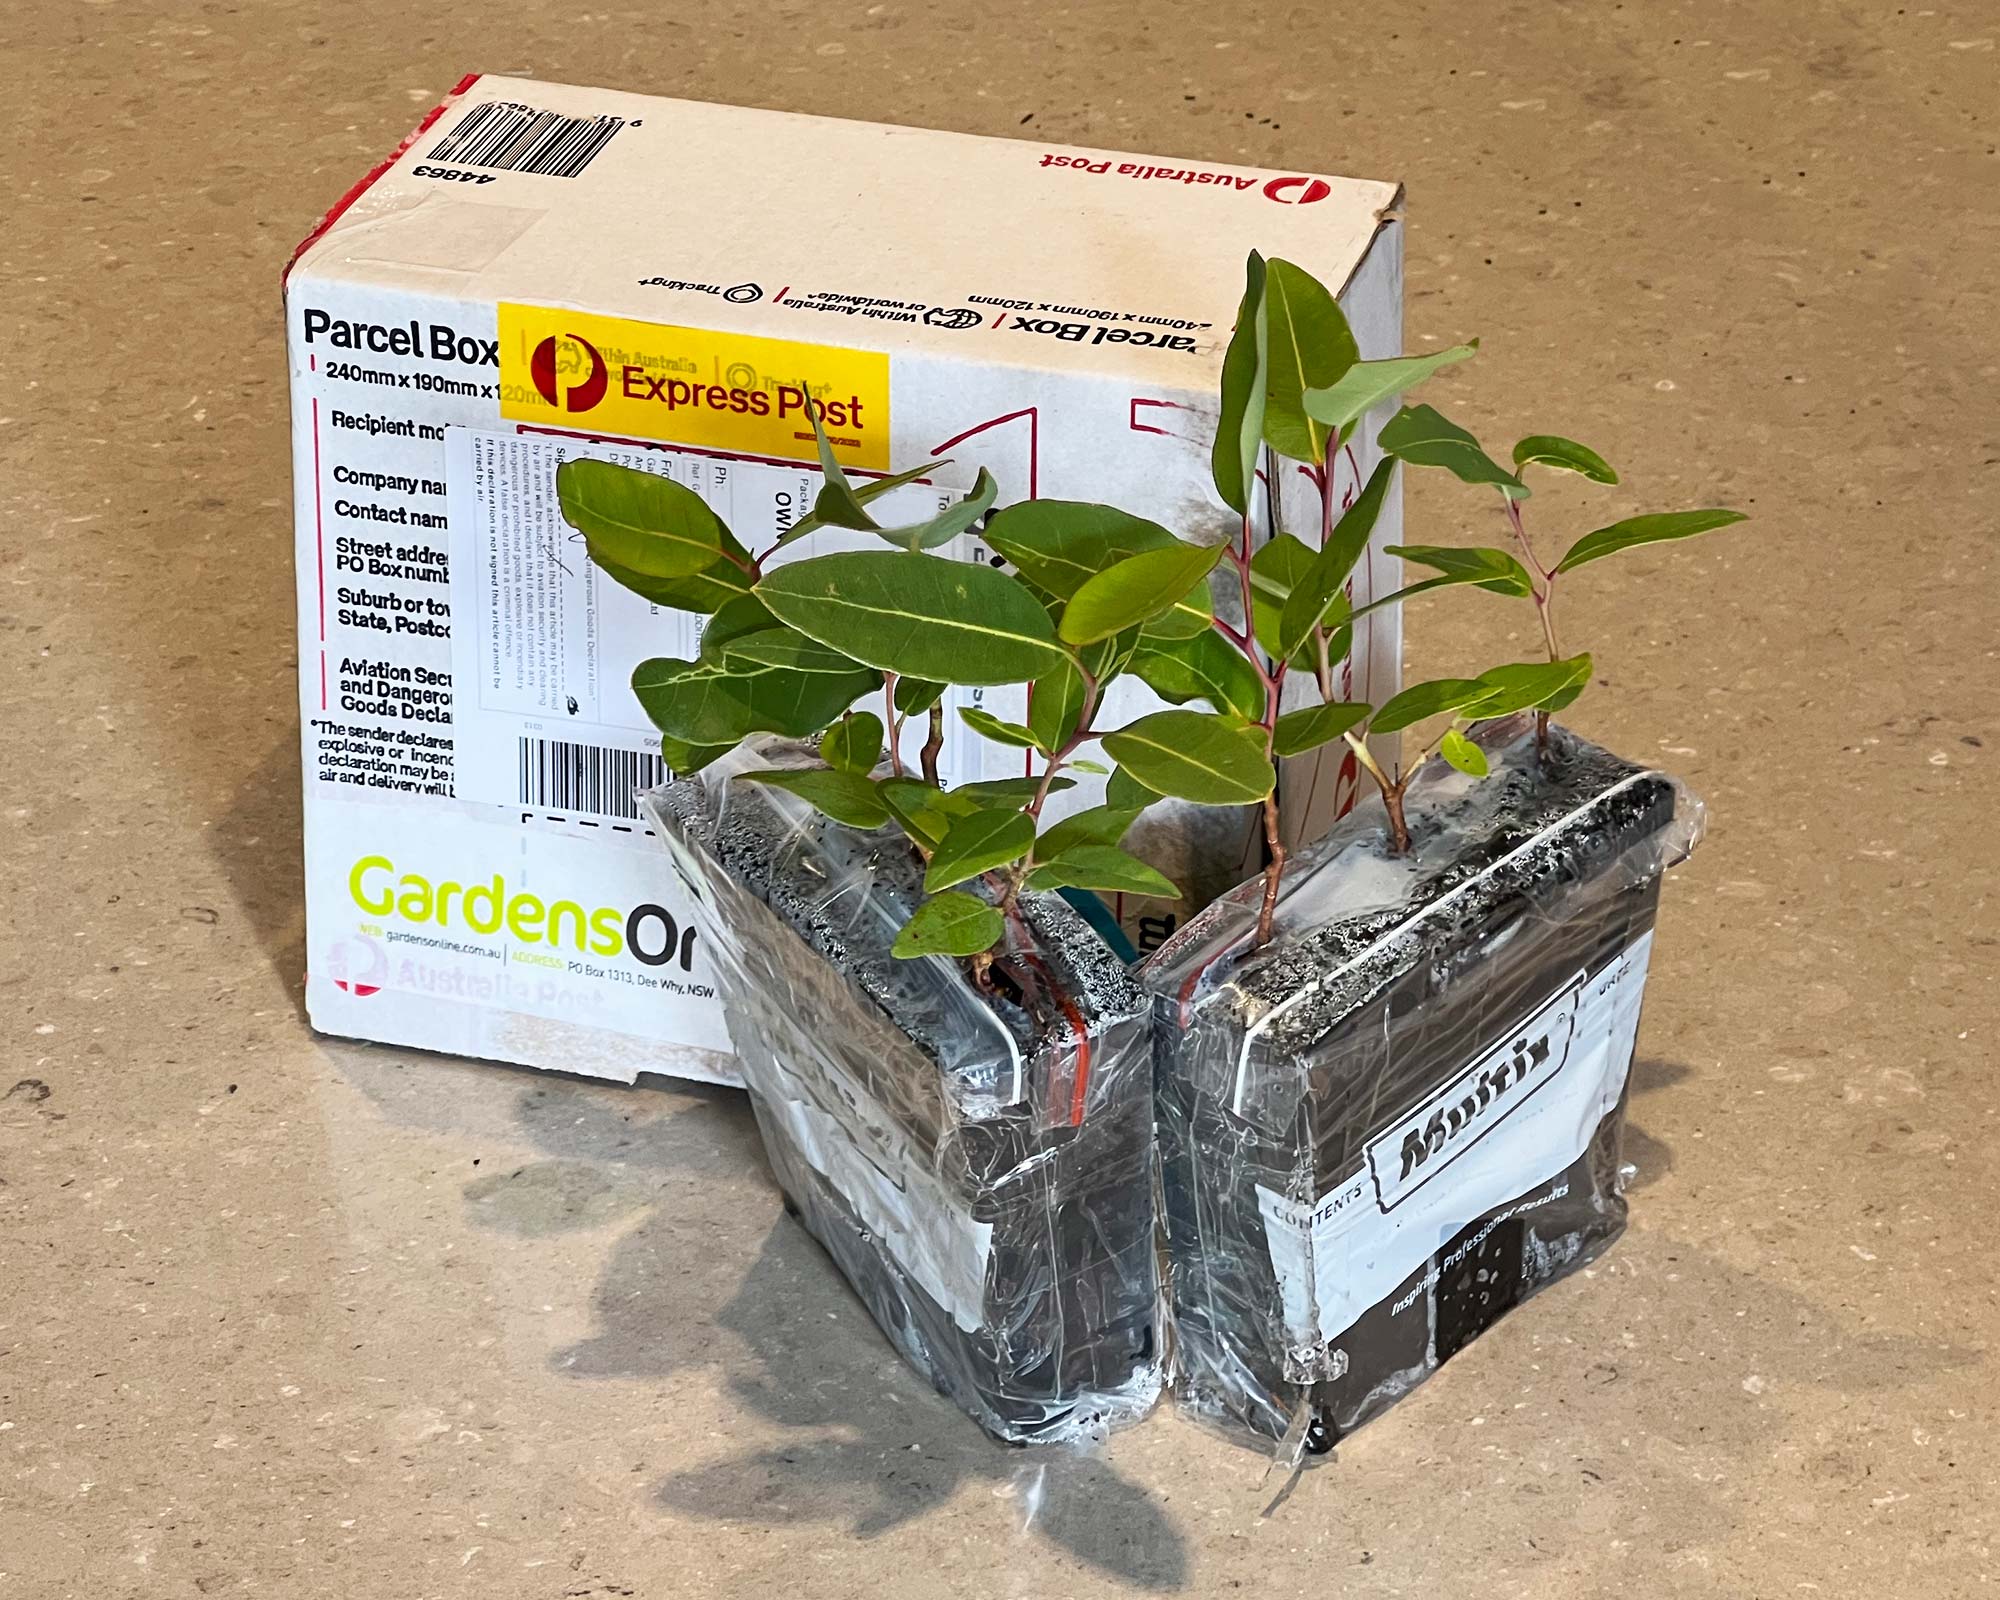 Packaged plants are sent by Express Post